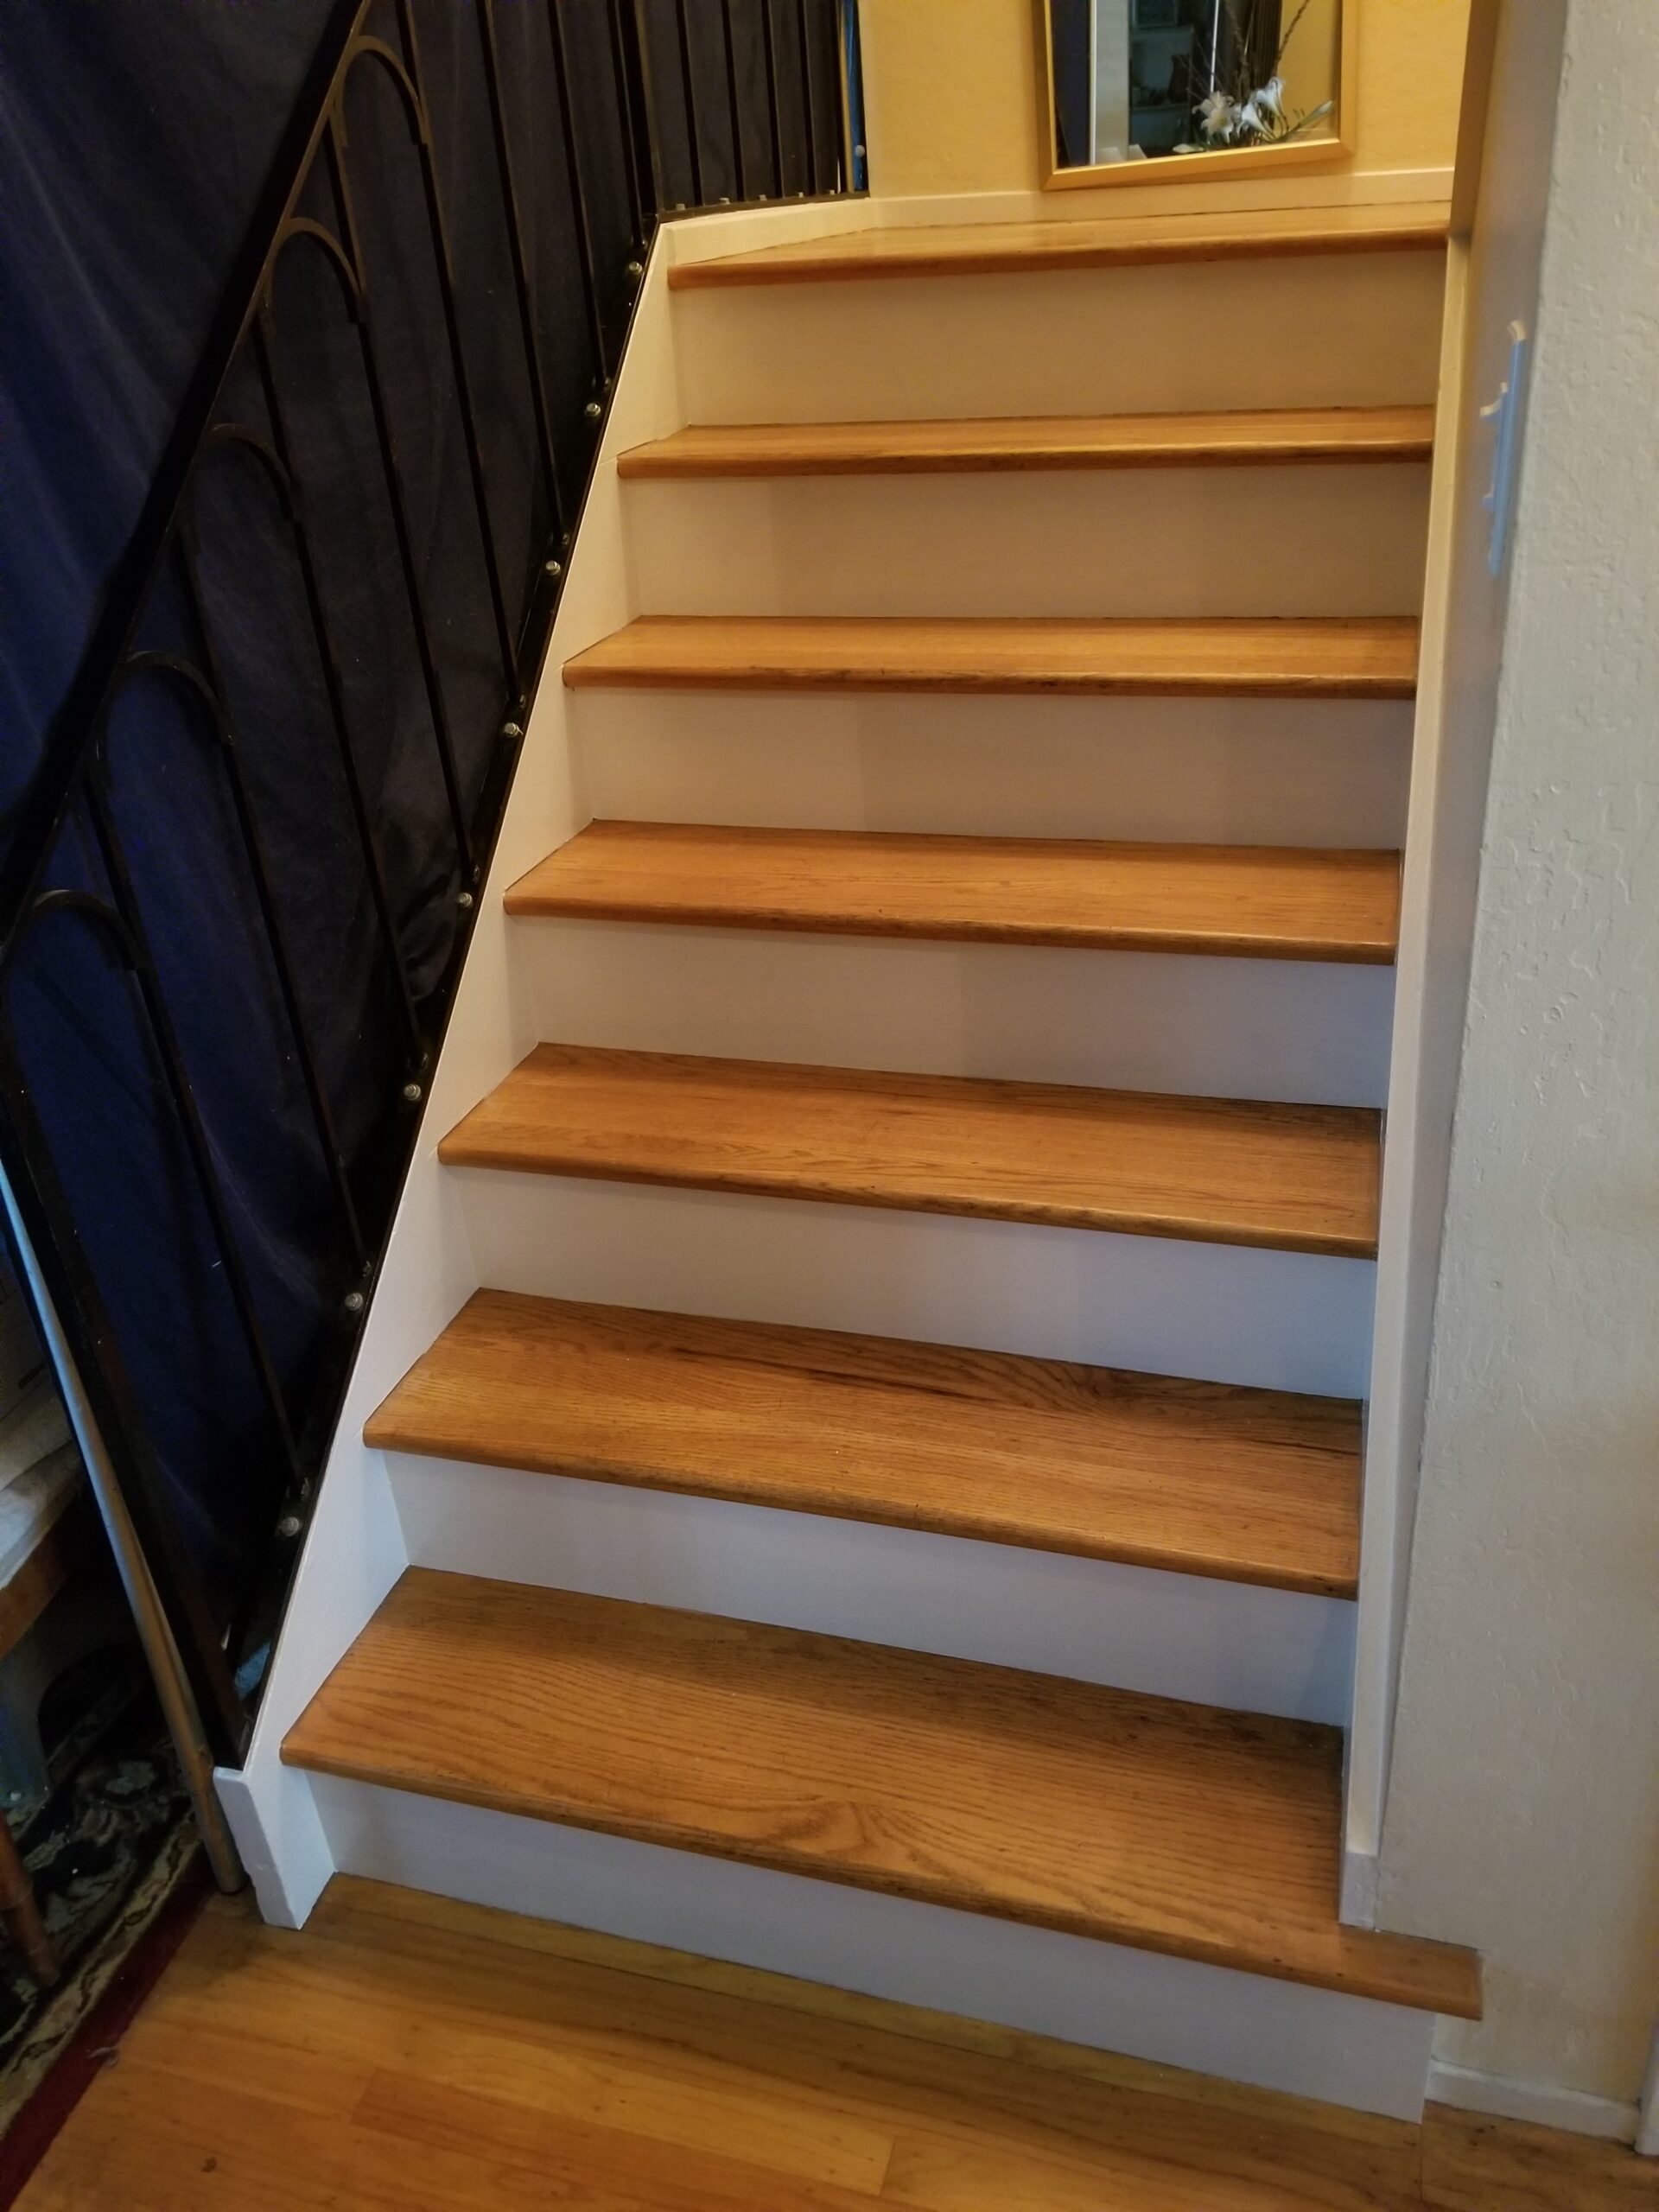 Refinished red oak stairs, Los Alto residential.